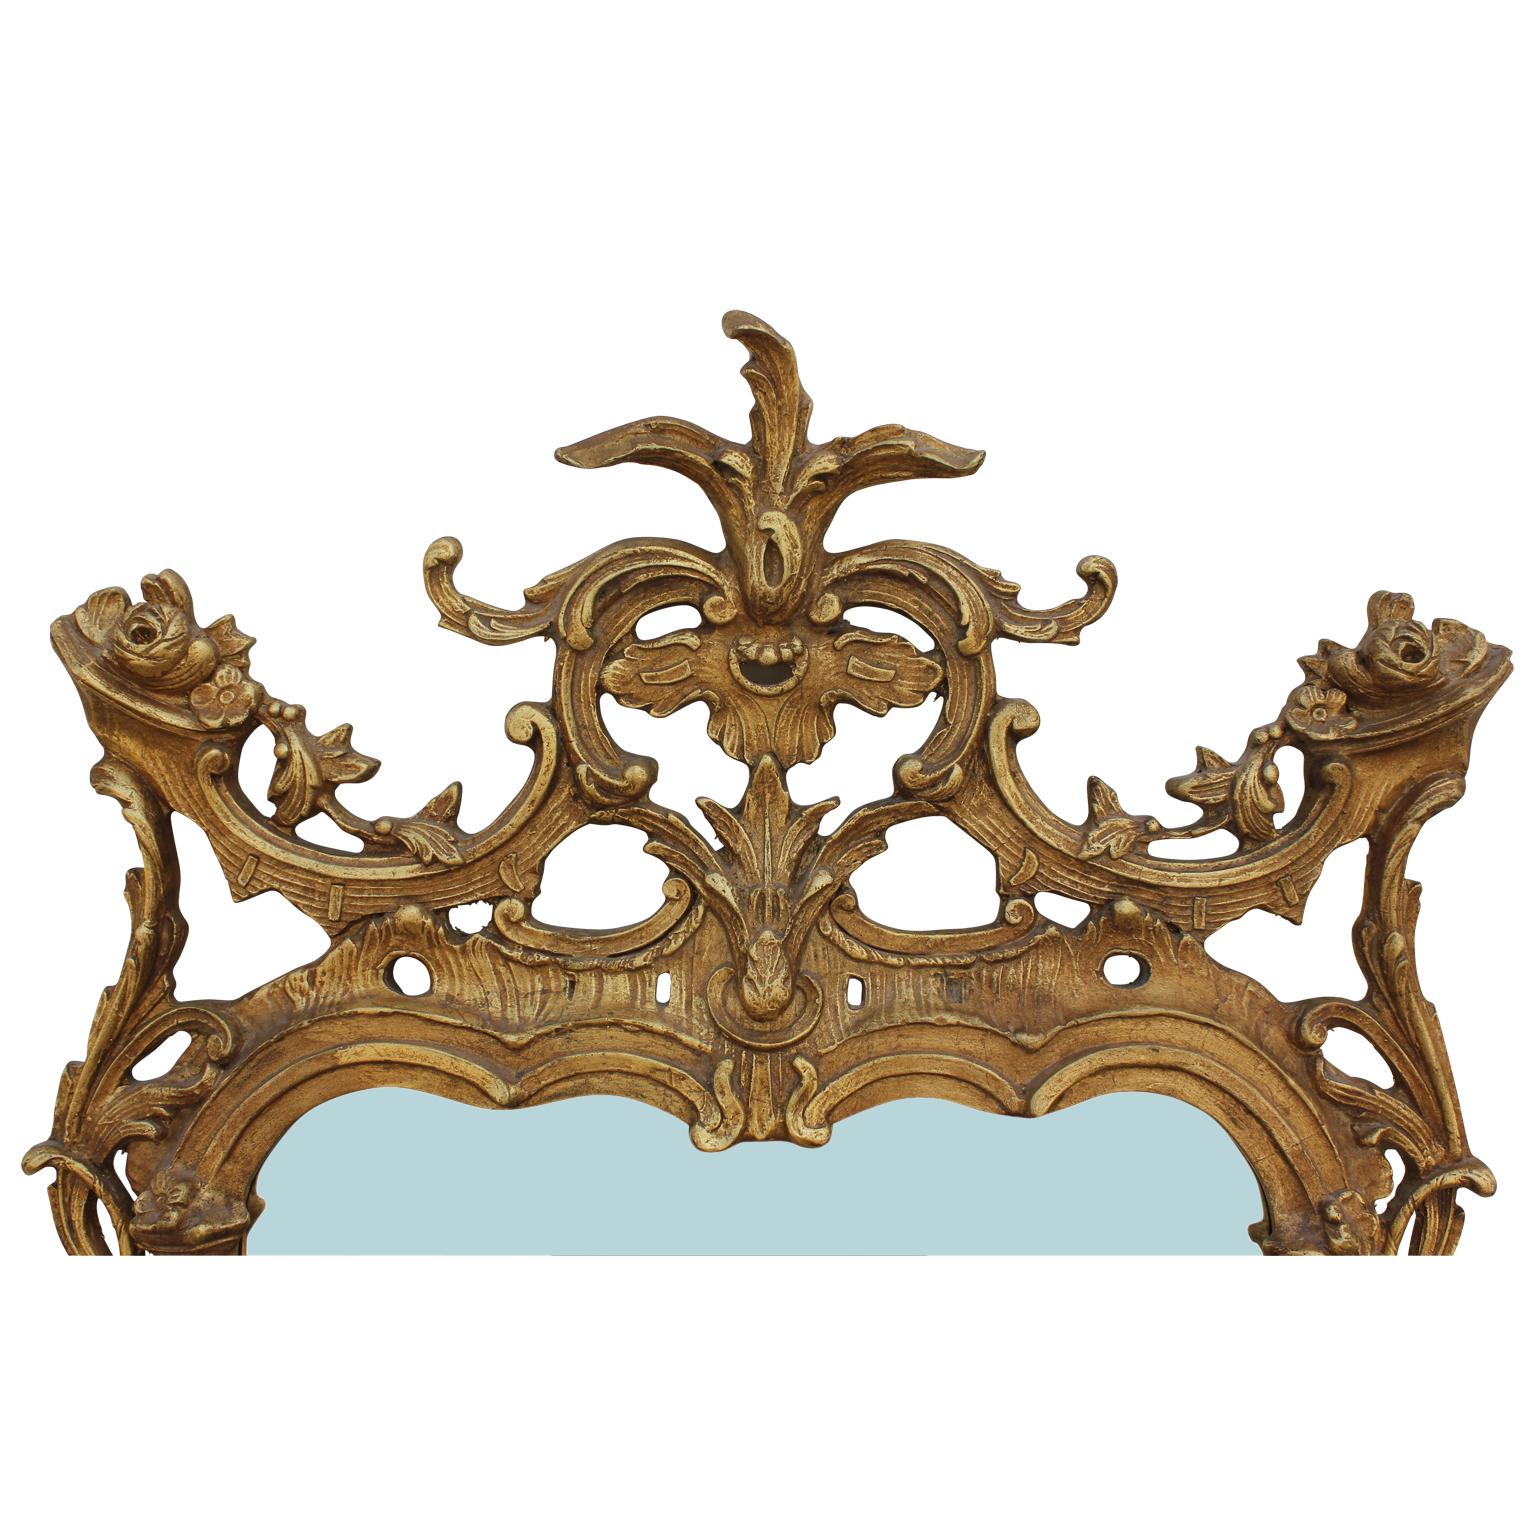 Chinese Chippendale or chinoiserie carved wall mirror circa 1940s. It is constructed of beautiful giltwood that still retains much of the original gold.